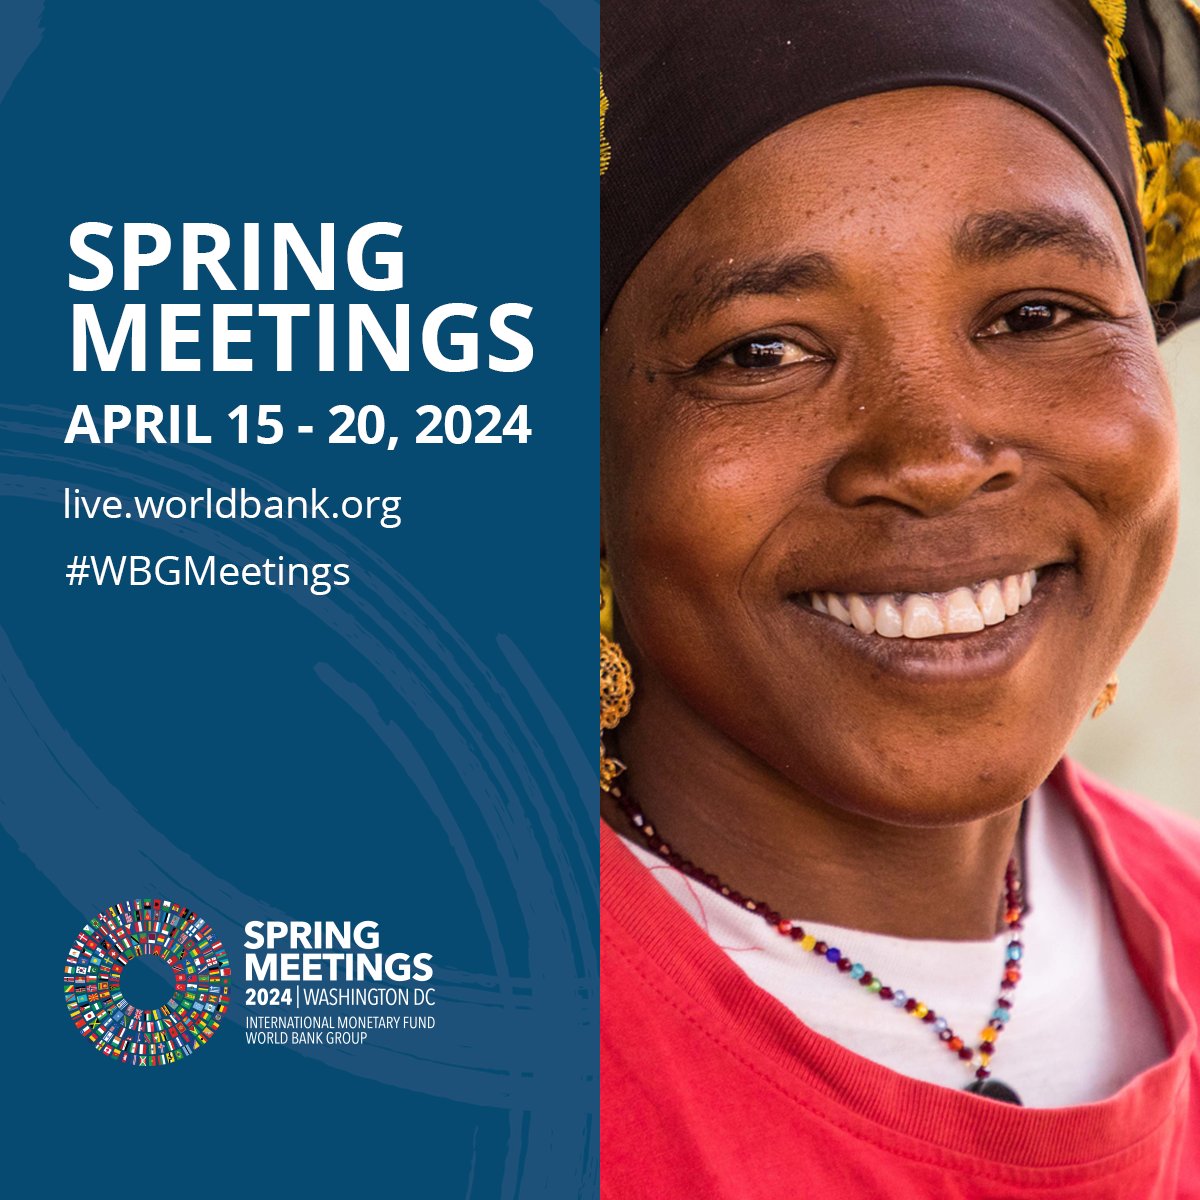 Don't miss the #WBGMeetings this April 15-20! Leaders from government, private sector, civil society, and academia converge in DC to tackle global development issues. Be part of the conversation and join us online: wrld.bg/Q5uF50RfK0B